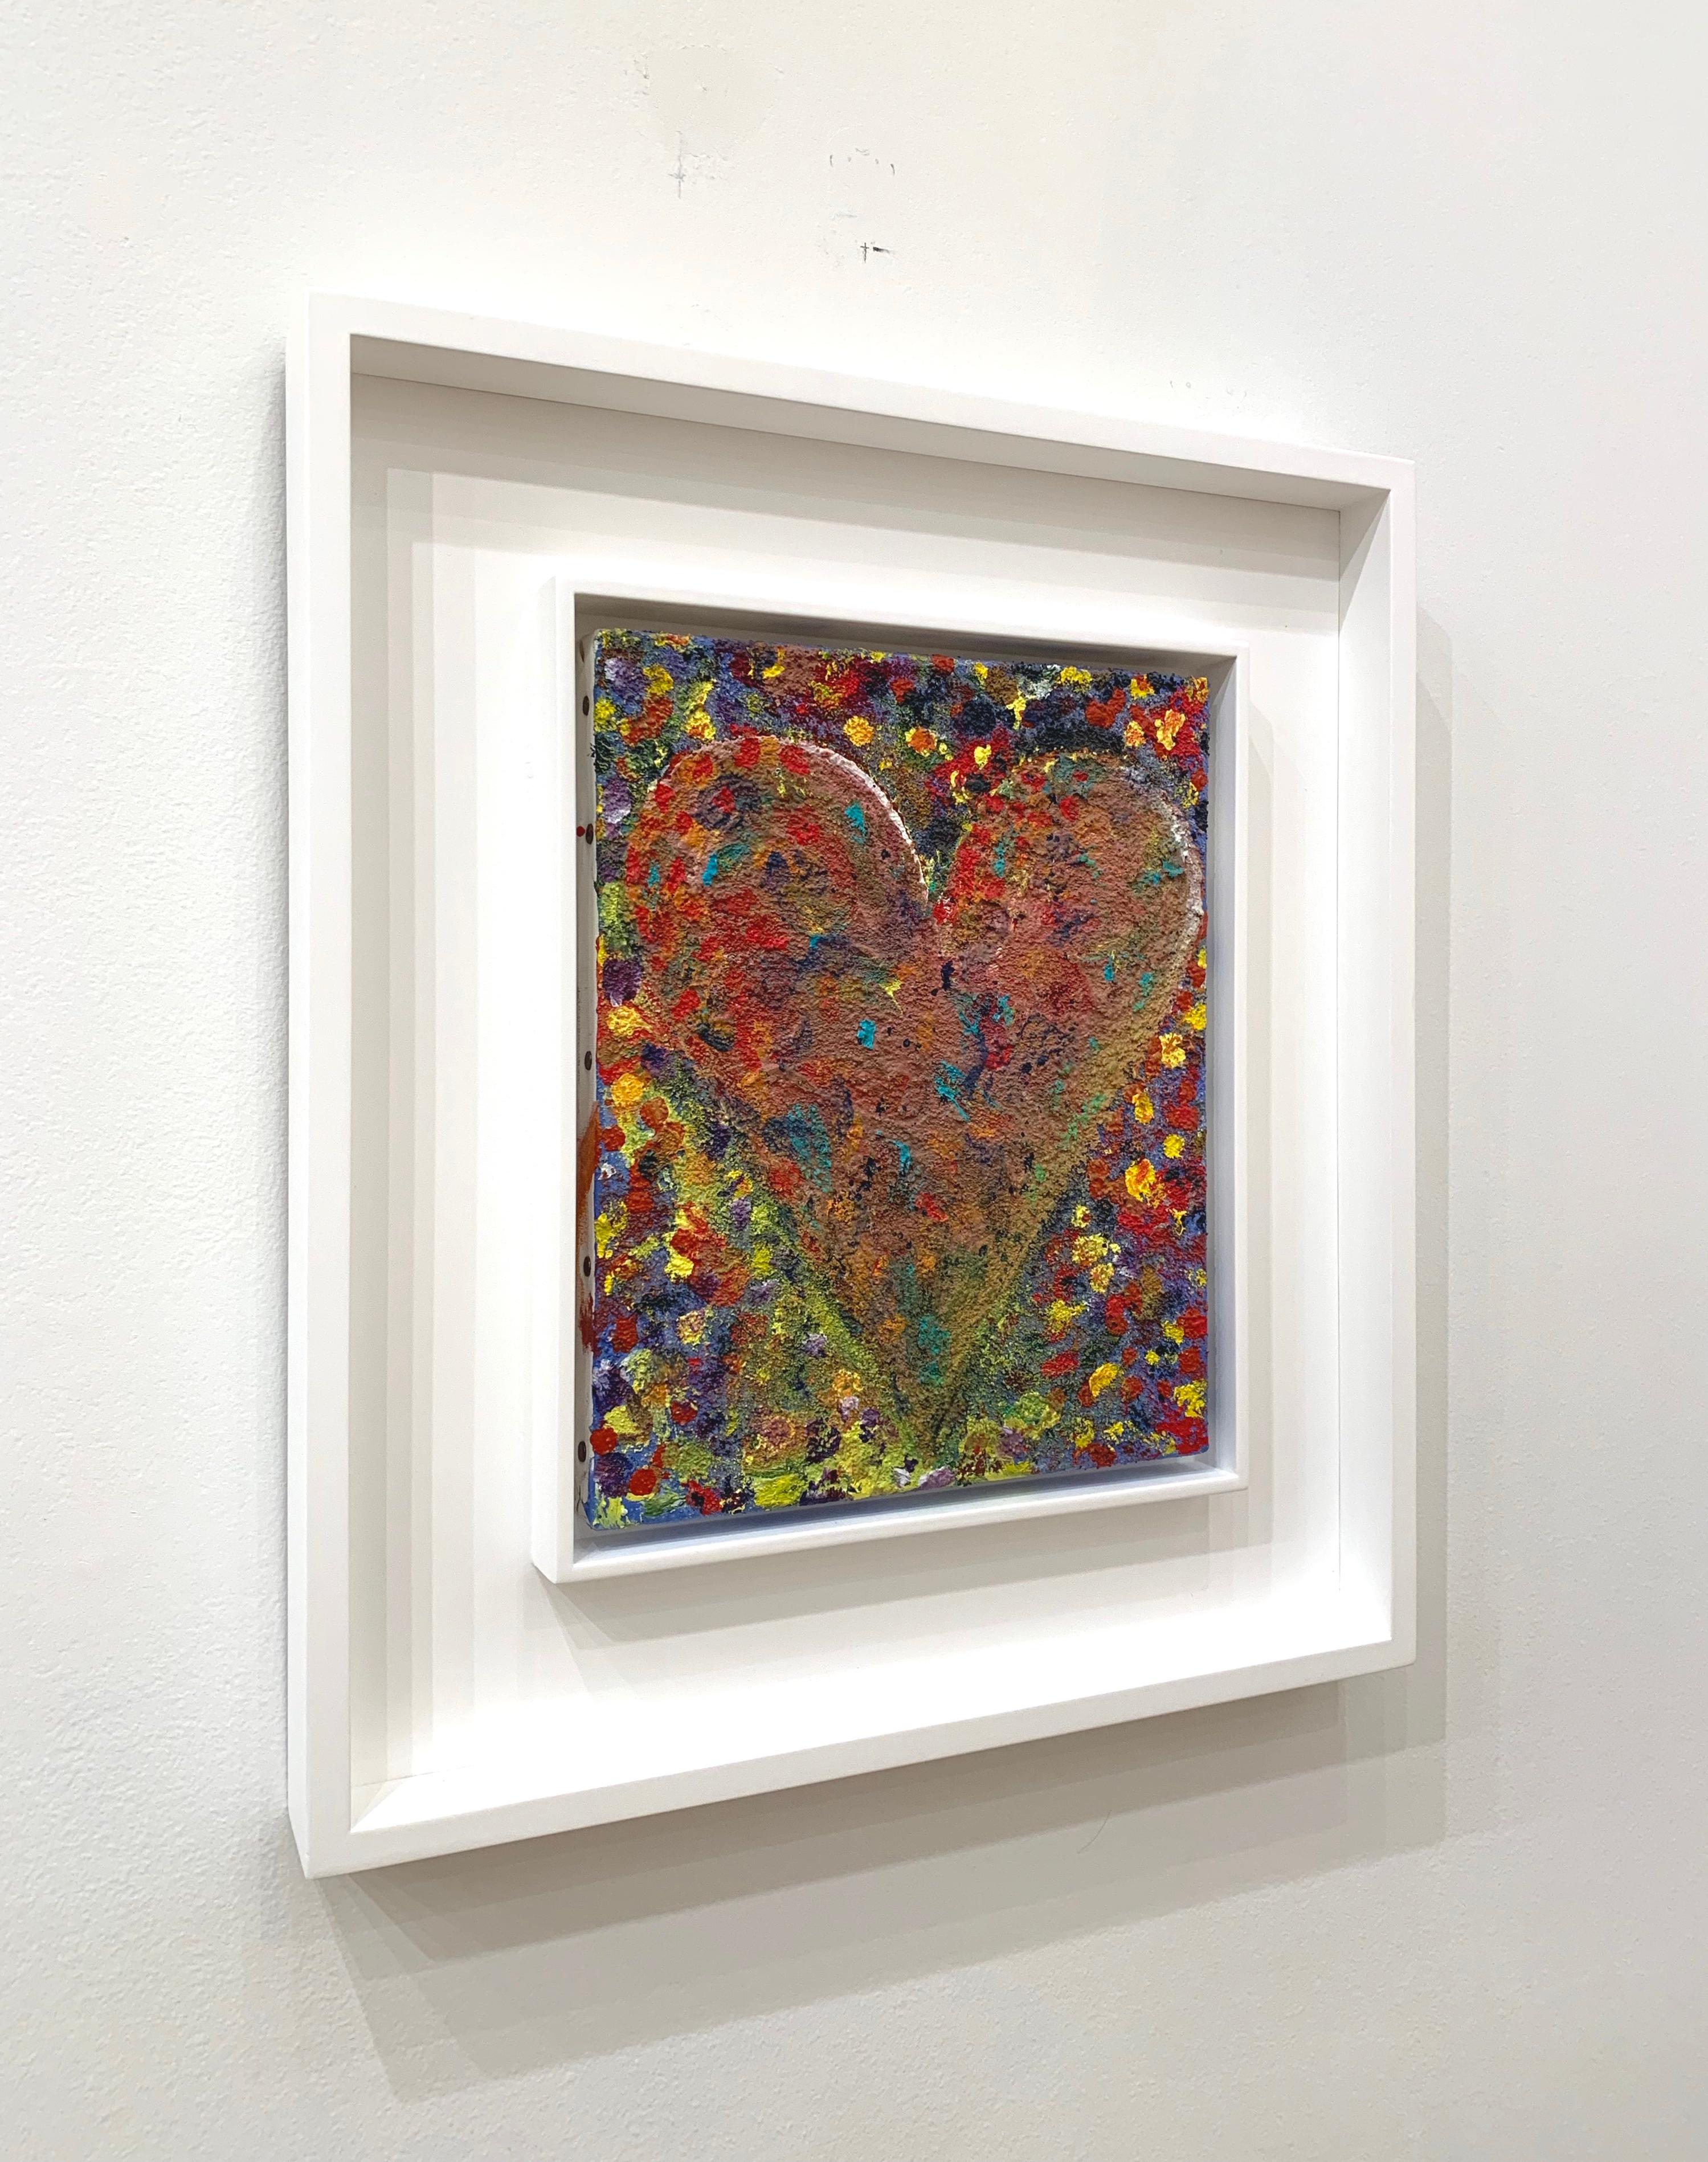 Heart in the Sand - Painting by Jim Dine